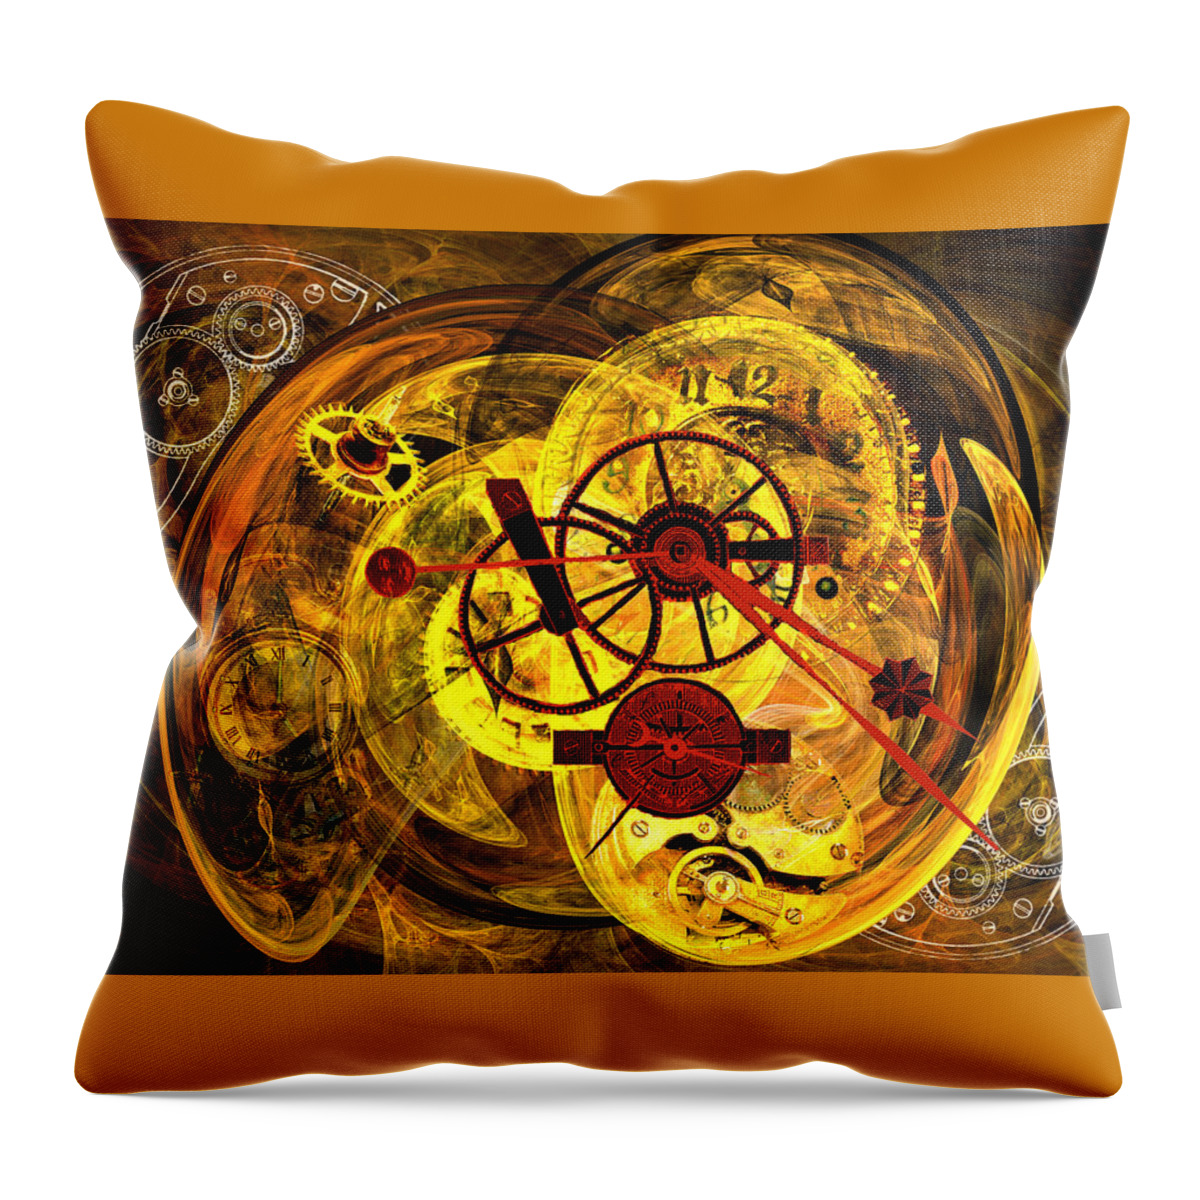 Clock Throw Pillow featuring the digital art Clocks by Lisa Yount